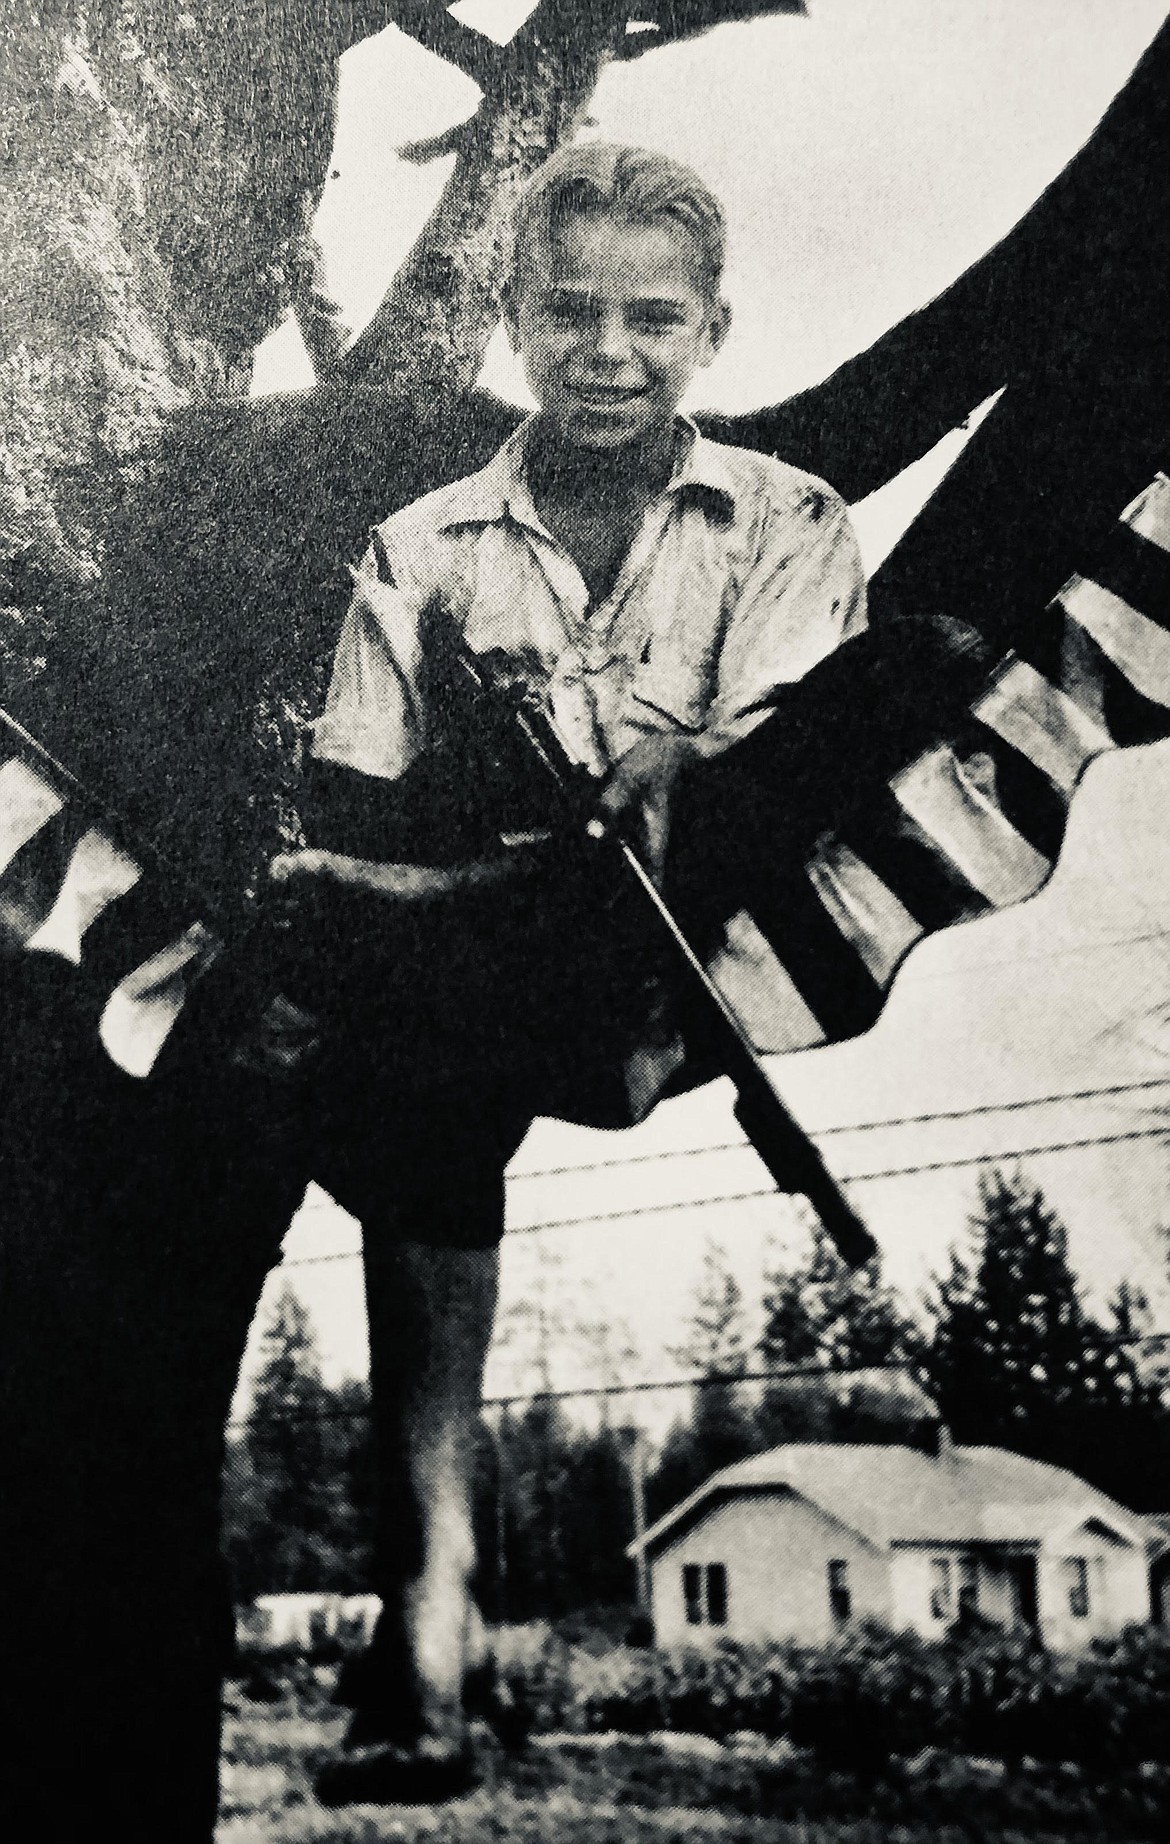 A photo from Louise Shadduck's book, "At the Edge of the Ice" about Elmo Wilcox, 13, who stayed in a tree from mid-July until school bells in September 1930. Elmo is holding a fake machine-gun in the photo (to keep marauders away from his treehouse).